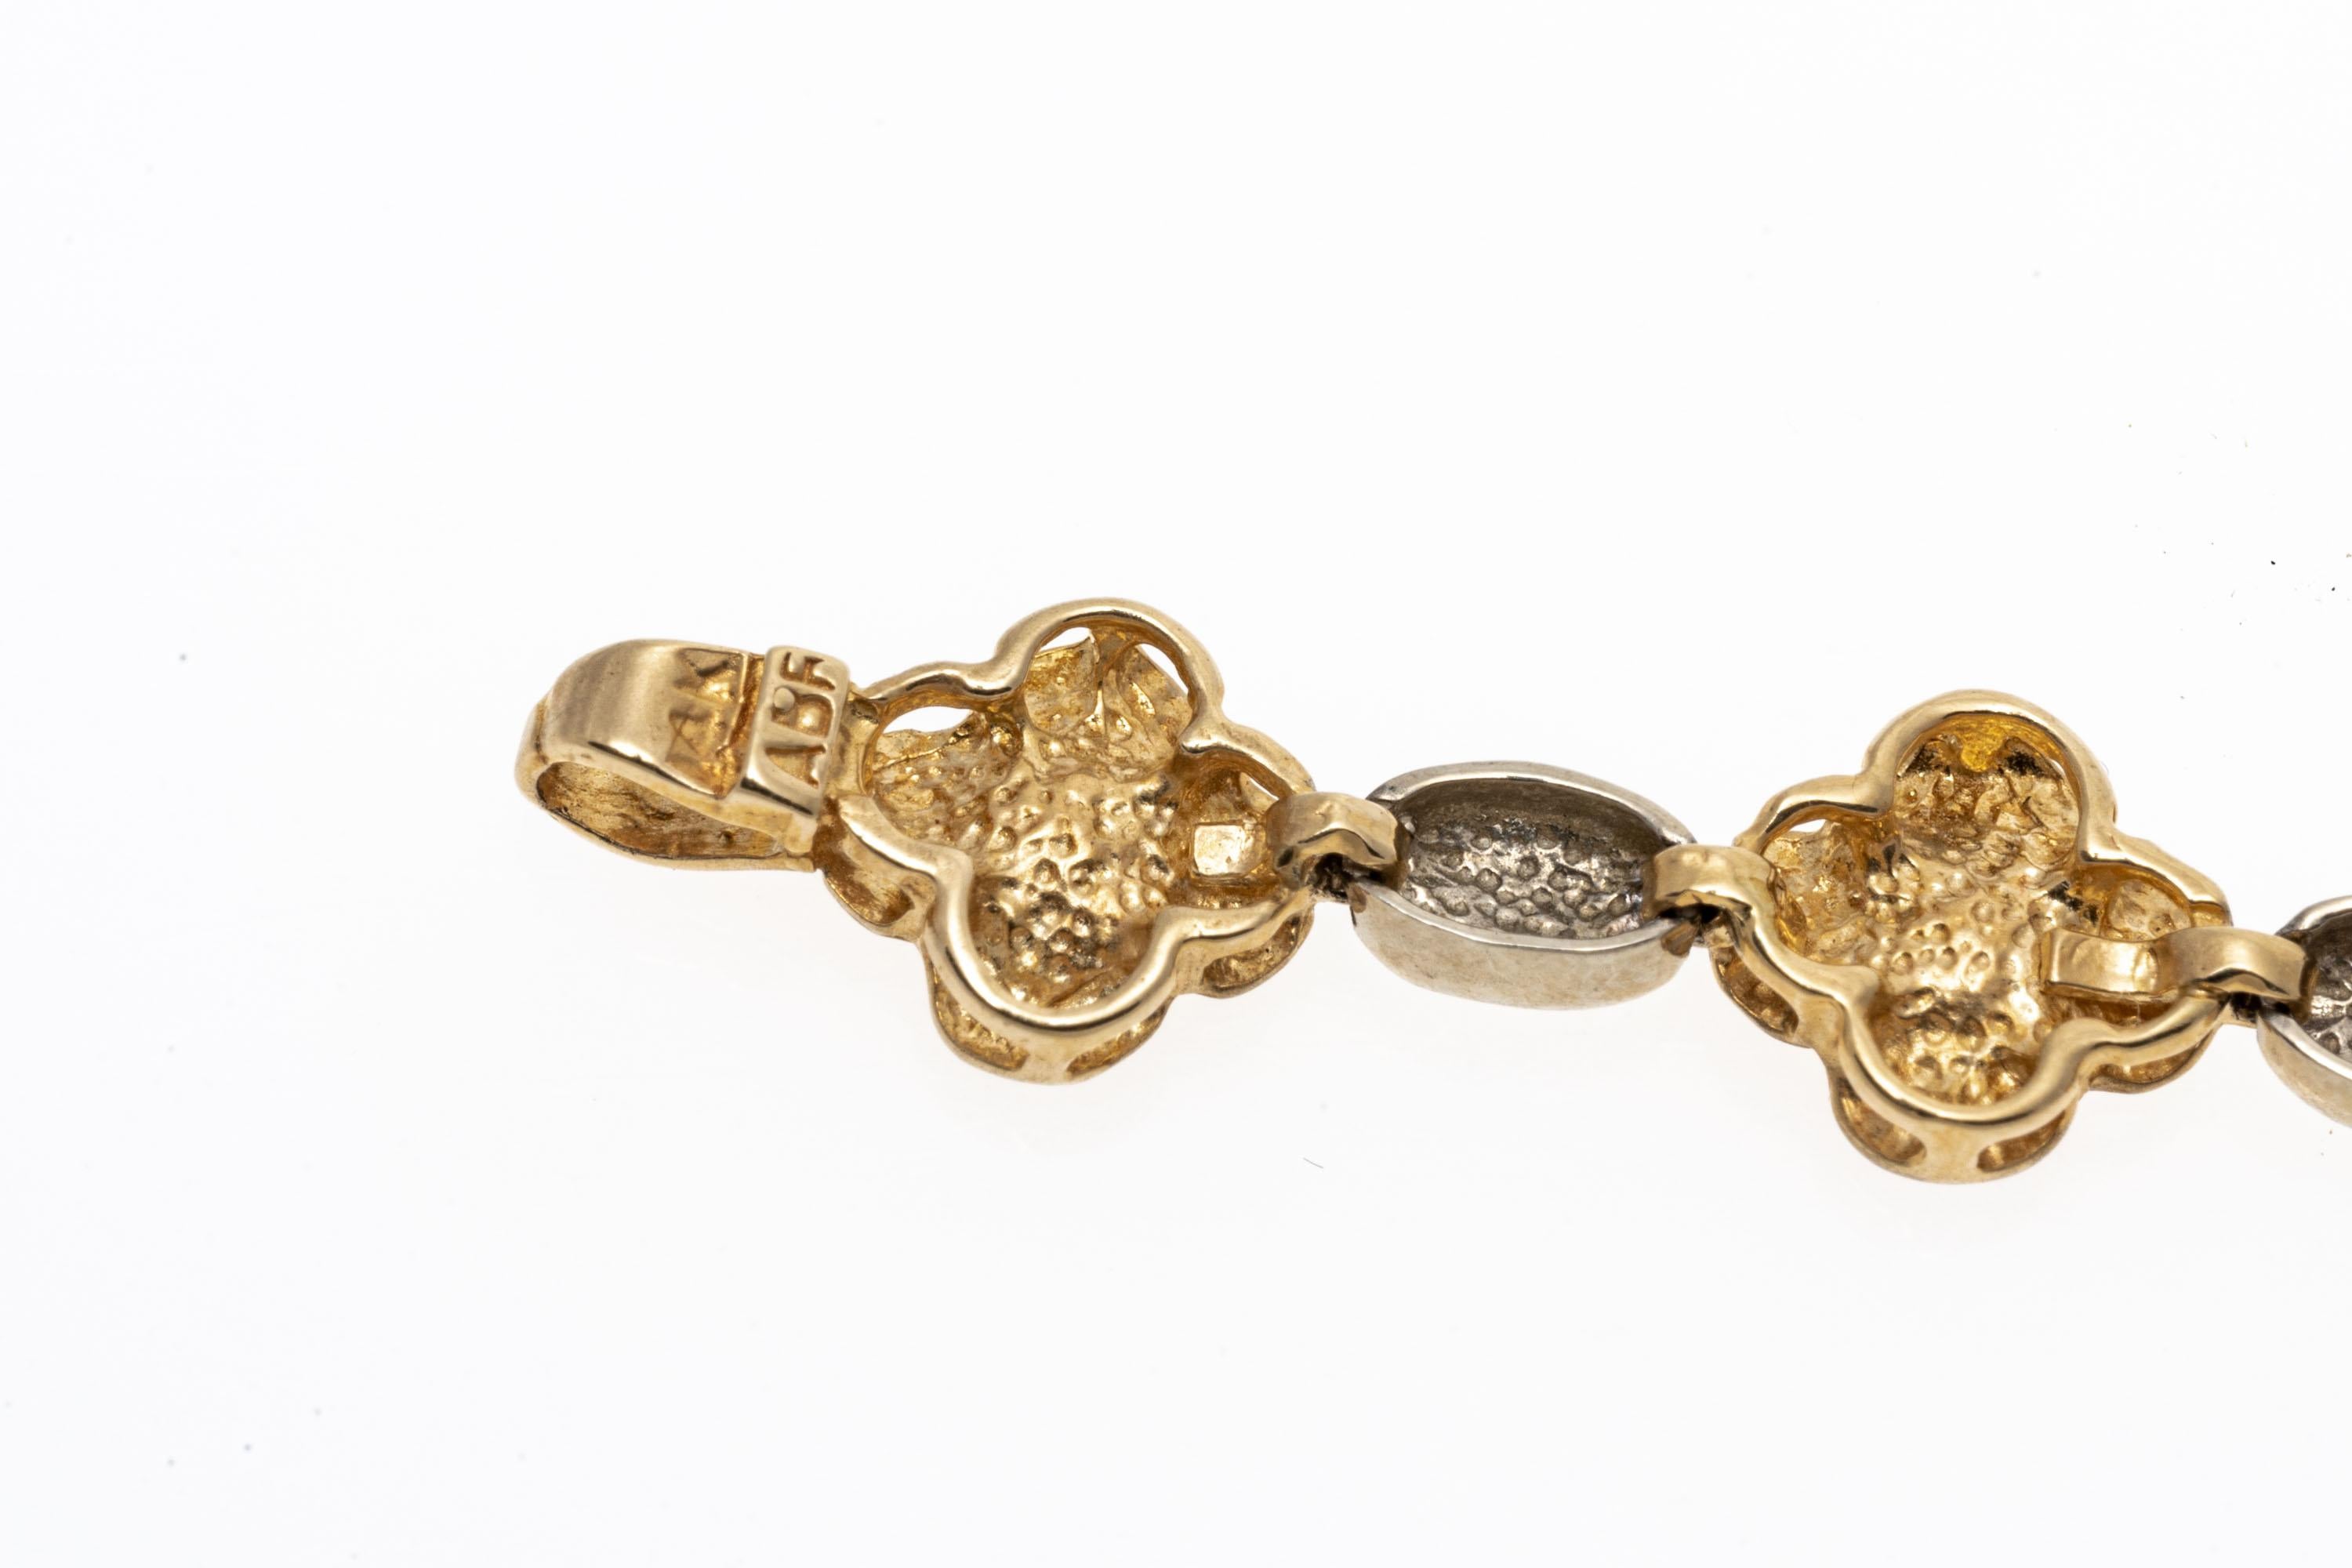 An Italian line bracelet crafted from 14K gold. This charming line bracelet has an alternating design of yellow gold flowers with a matte finish and polished white gold connecting links. Lobster claw style clasp.
Marks: 14K Italy ABF
Dimensions: 7